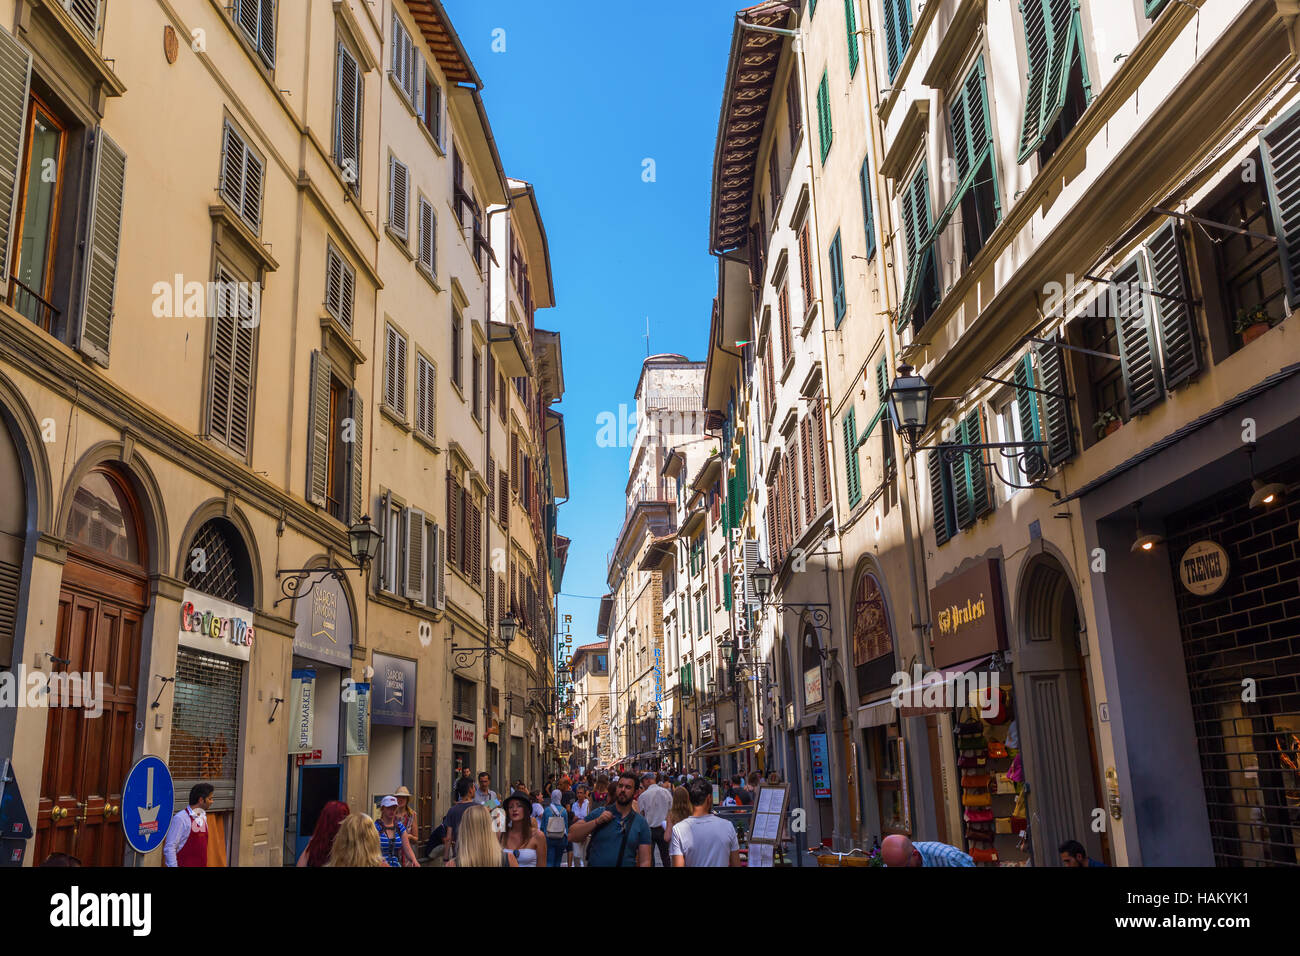 typical alley in Florence, Italy Stock Photo